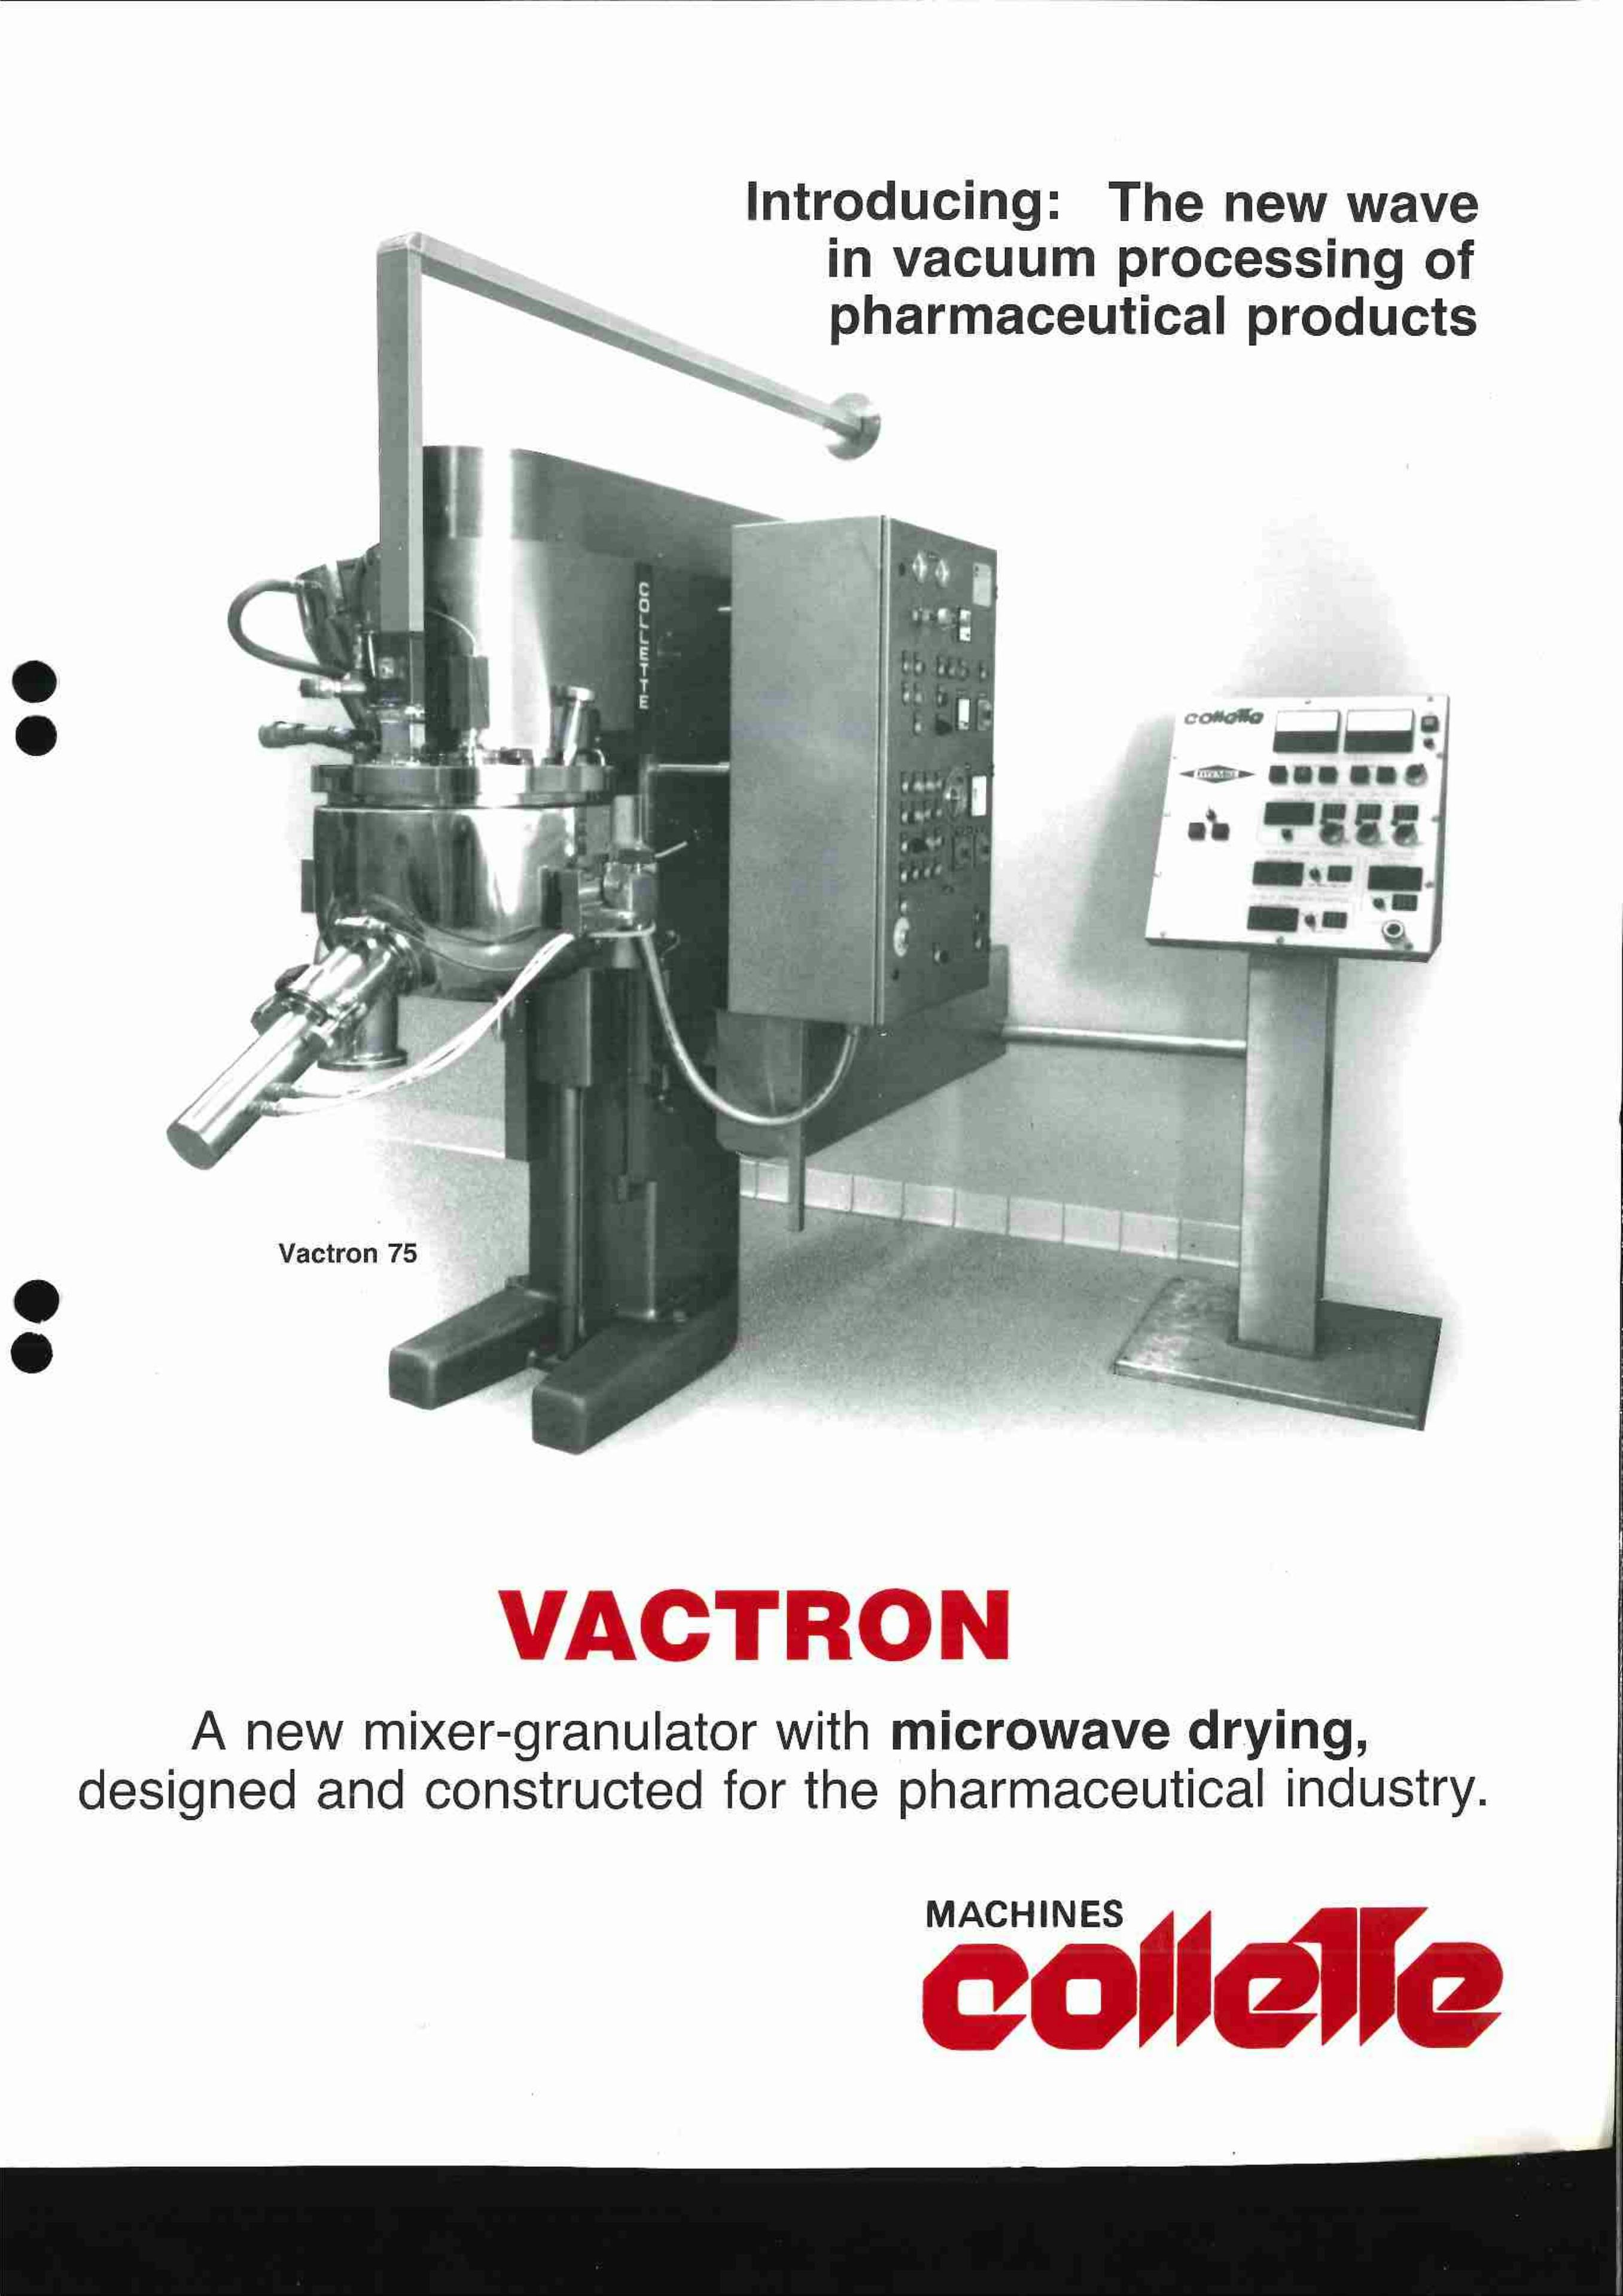 Collette GRAL 75 Vactron Microwave Drying and Solvent Recovery - Univerzální smešovac - image 22